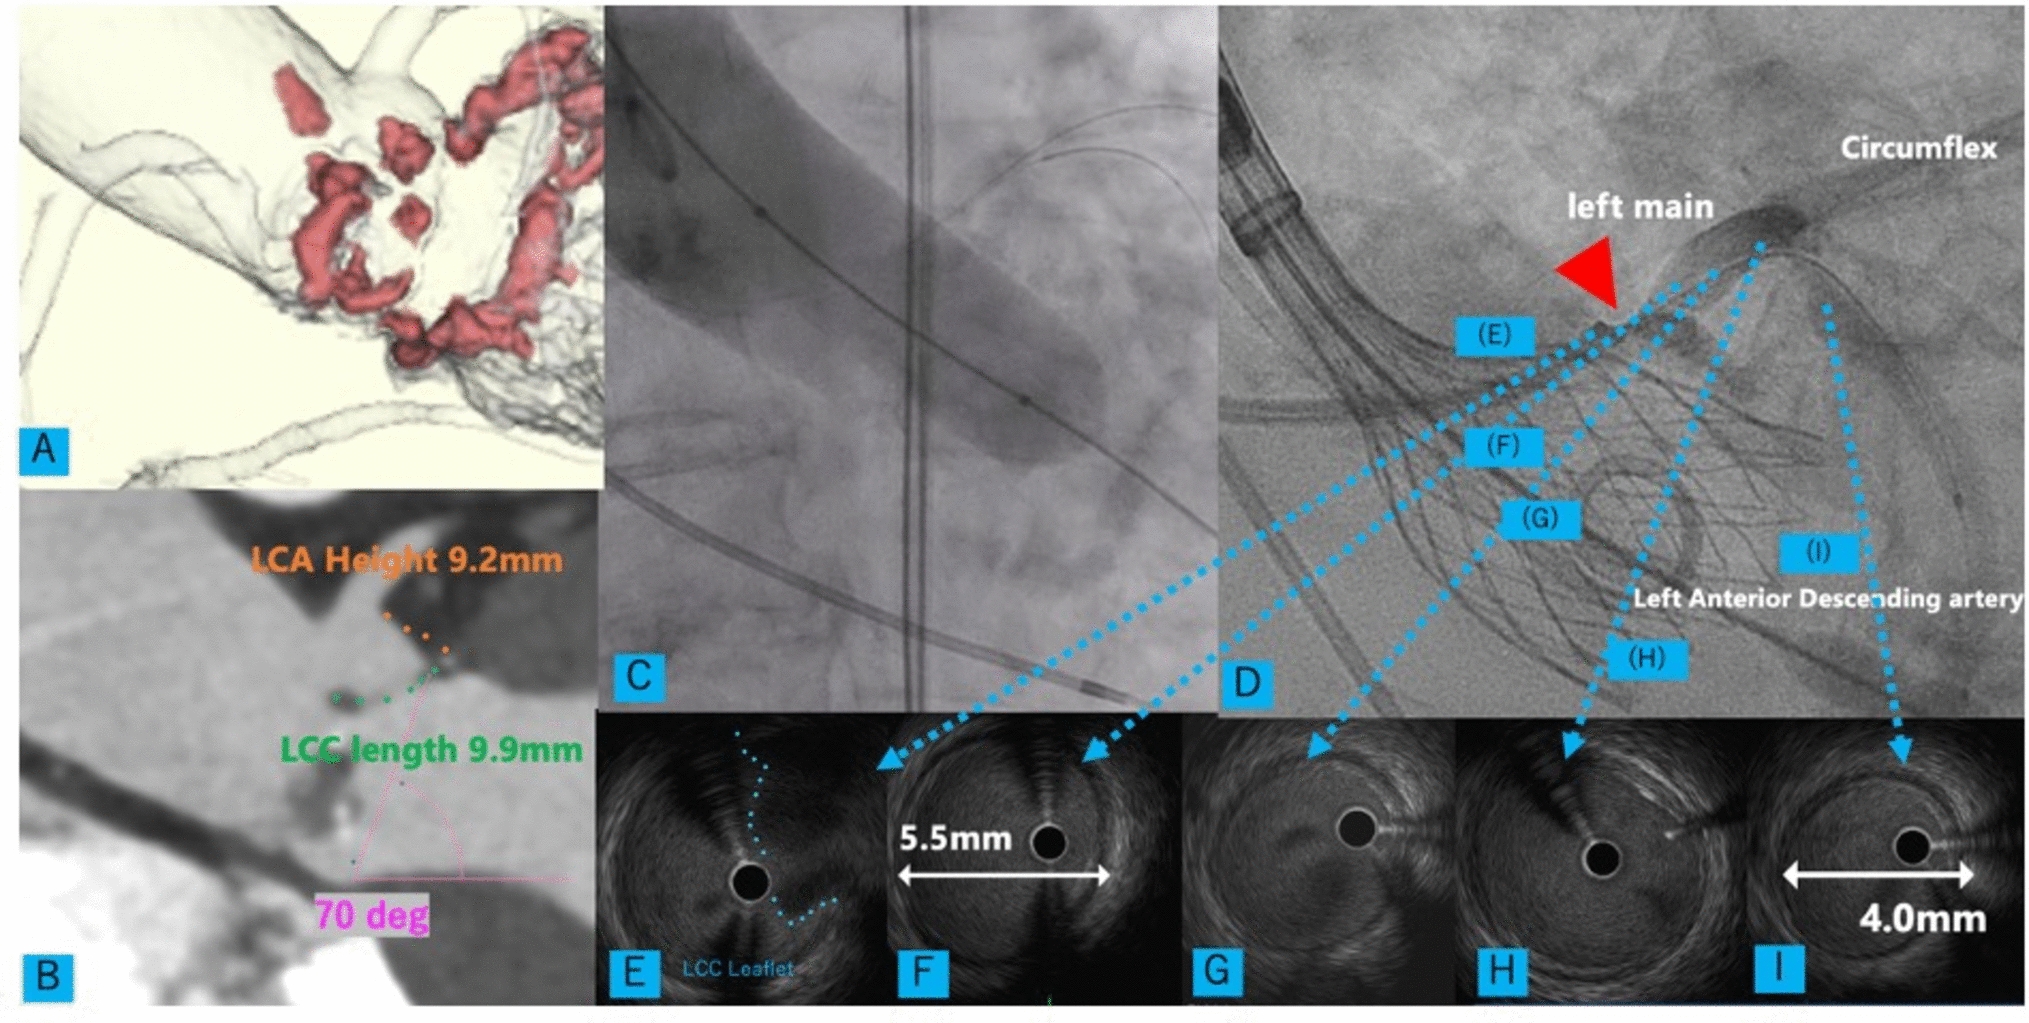 Intravascular ultrasound guide chimney stenting during transcatheter aortic valve replacement